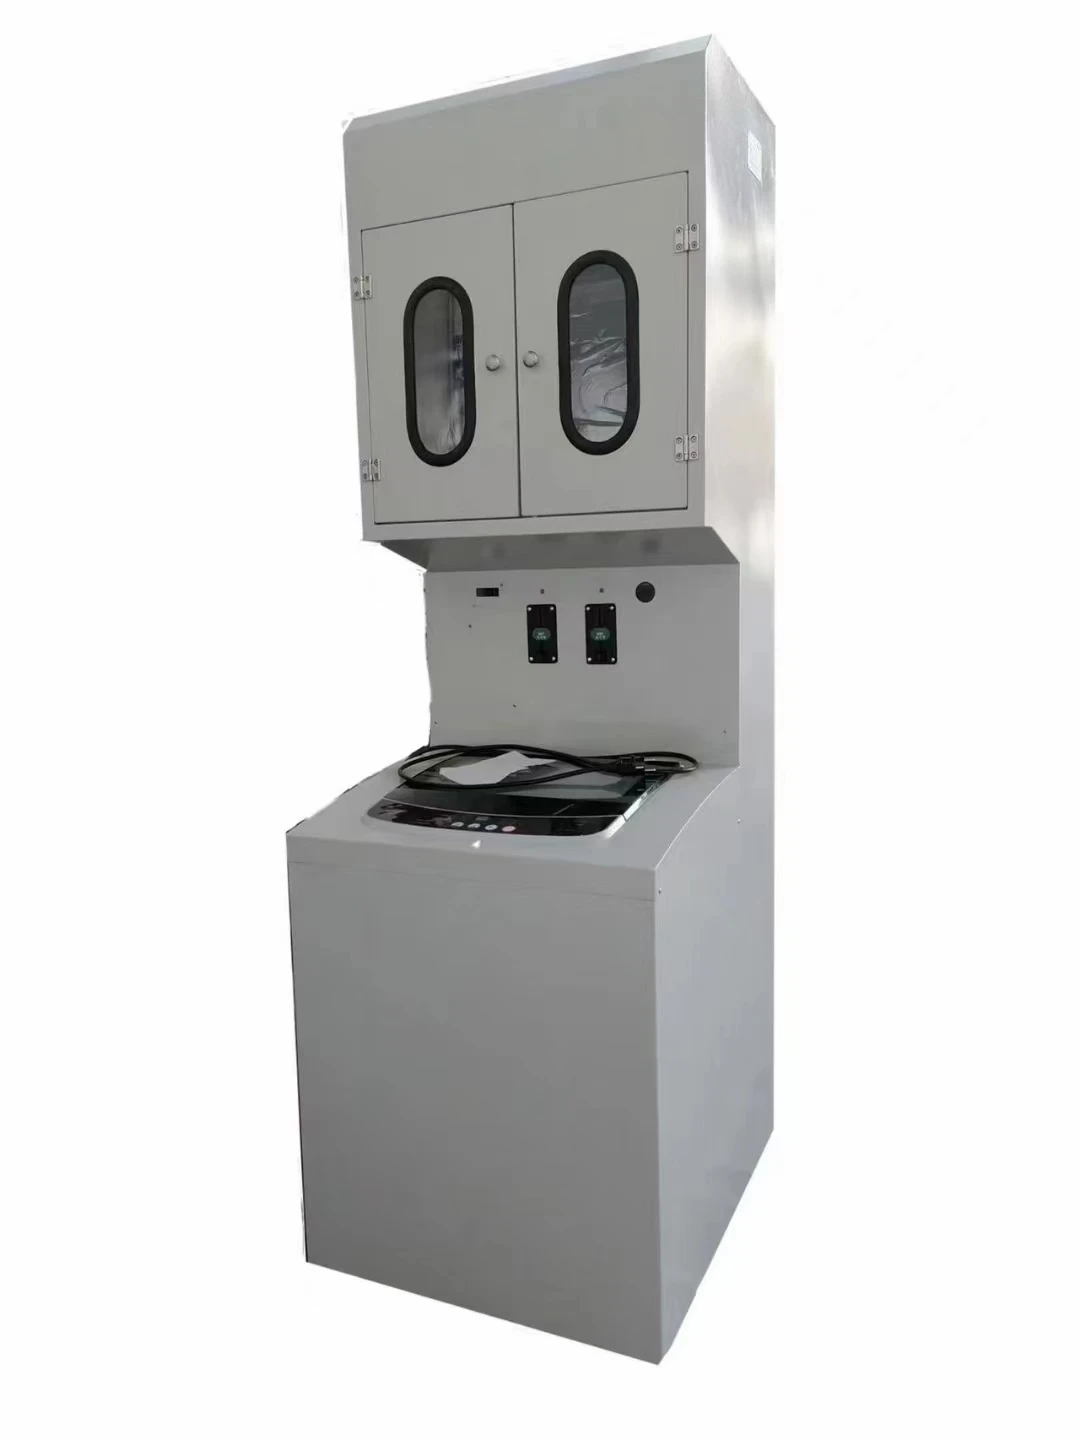 Full automatic coin operated stack shoes washer dryer combo for self service laundry shop